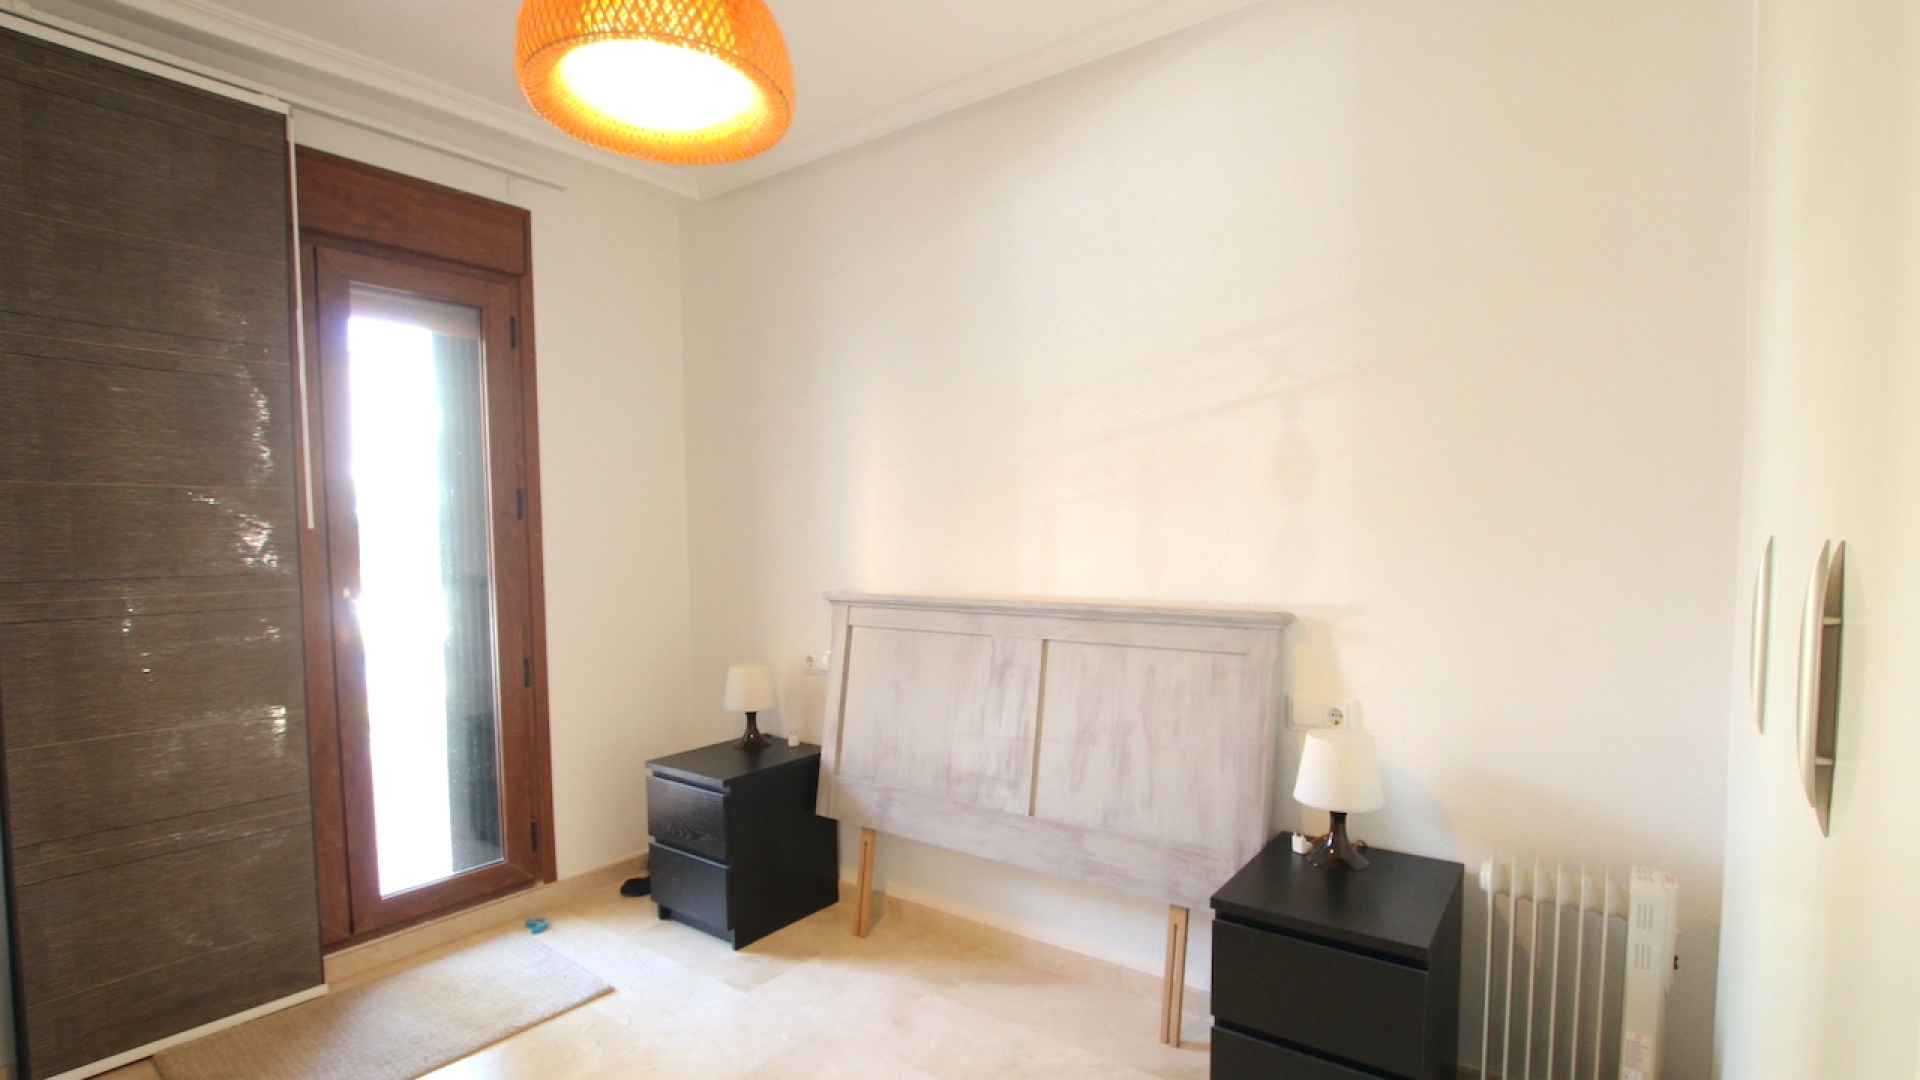 48344_superior_3_bed_2_bath_townhouse_with_pool_views_(pau_8)_080224142627_img_6529